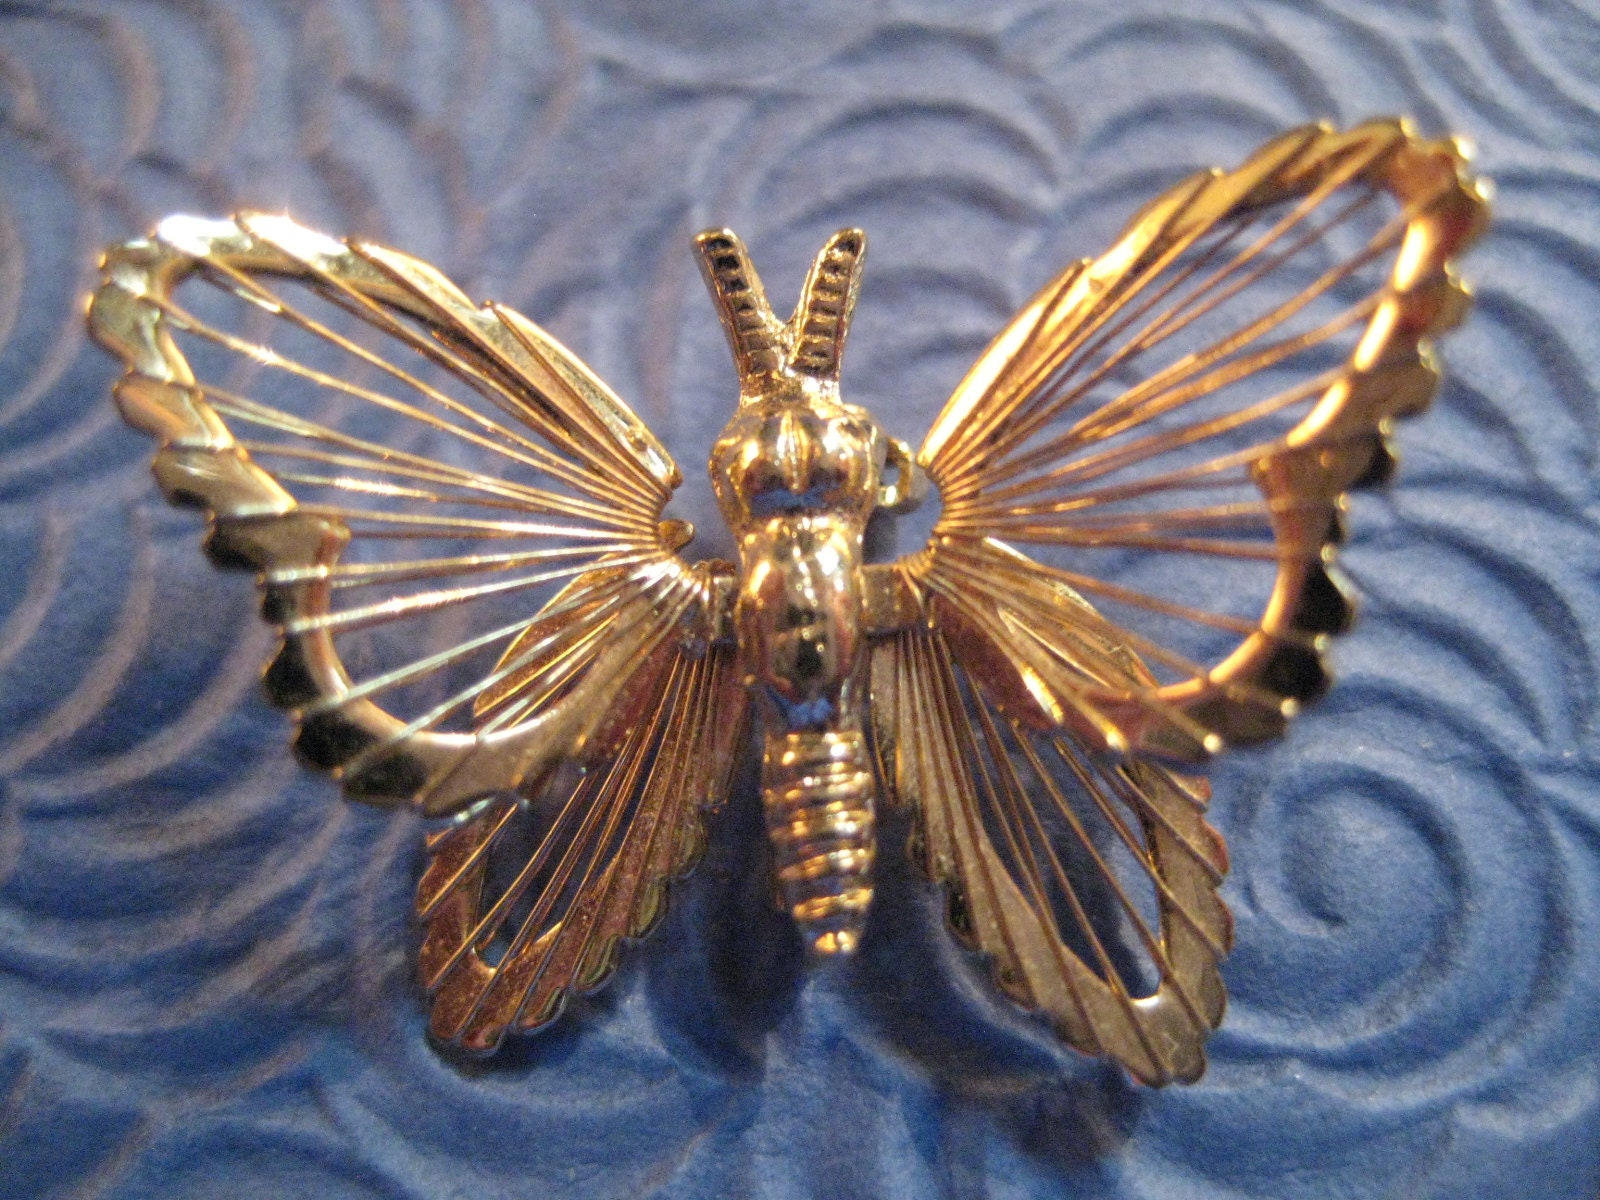 Monet's Menagerie Spinneret Gold Tone Butterfly Brooch Pin